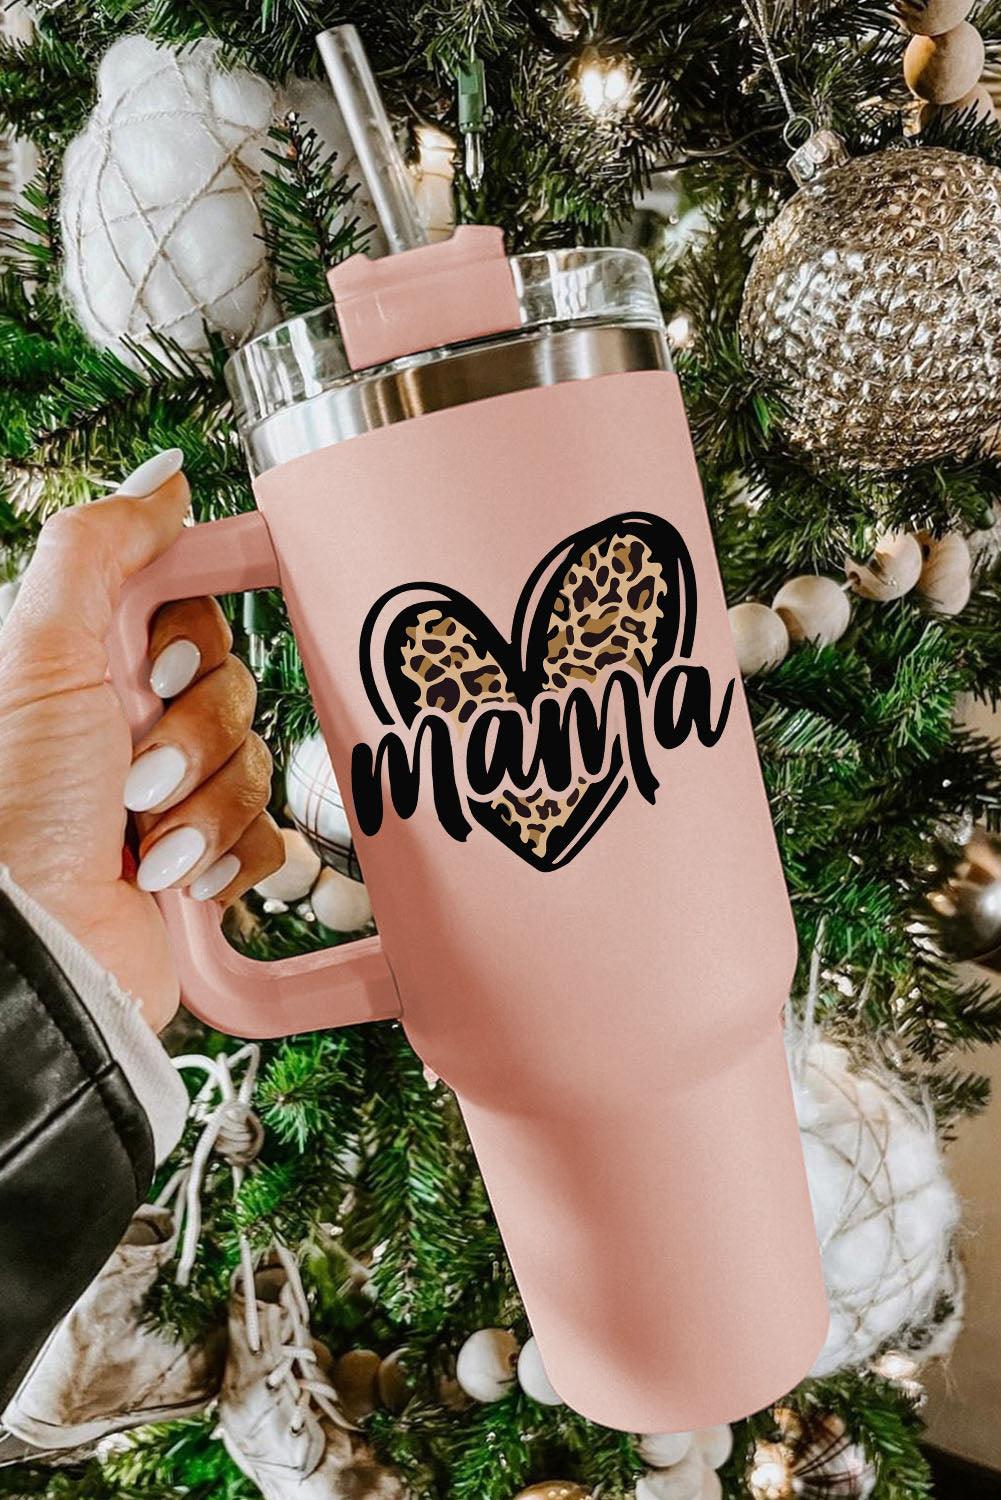 Carnation "mama" Heart Shaped Leopard Printe Stainless Steel Insulated Cup 40oz - God's Girl Gifts And Apparel